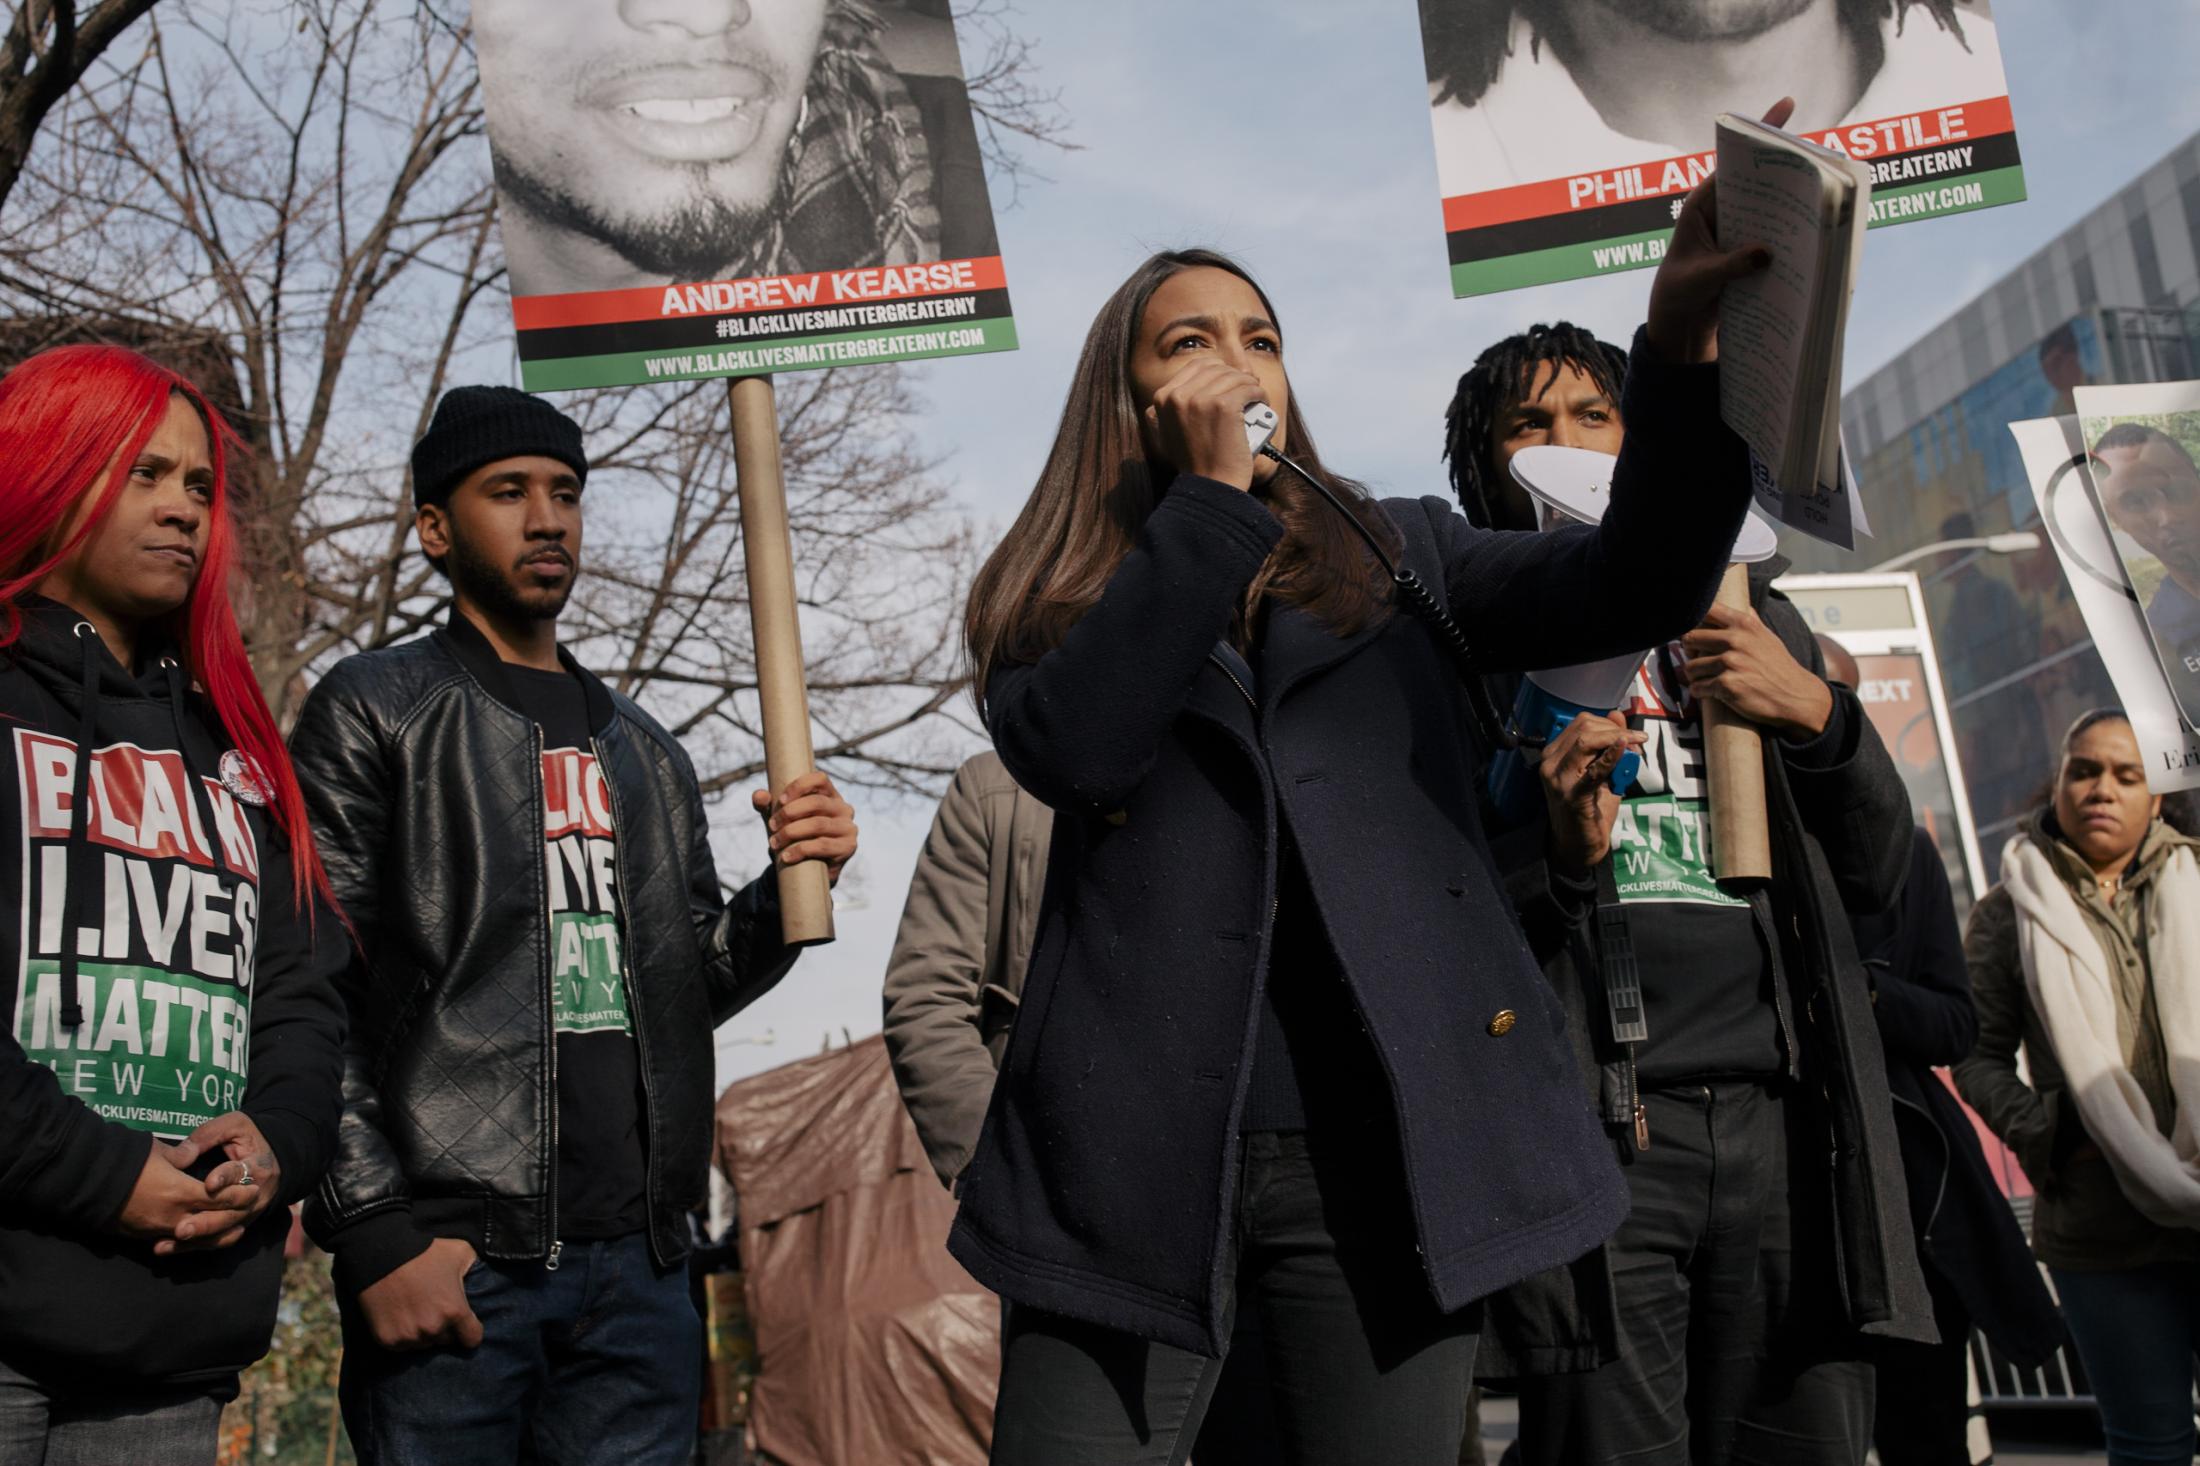 Soap Box in the Bronx - Amongst chanting and song, Alexandria Ocasio-Cortez...